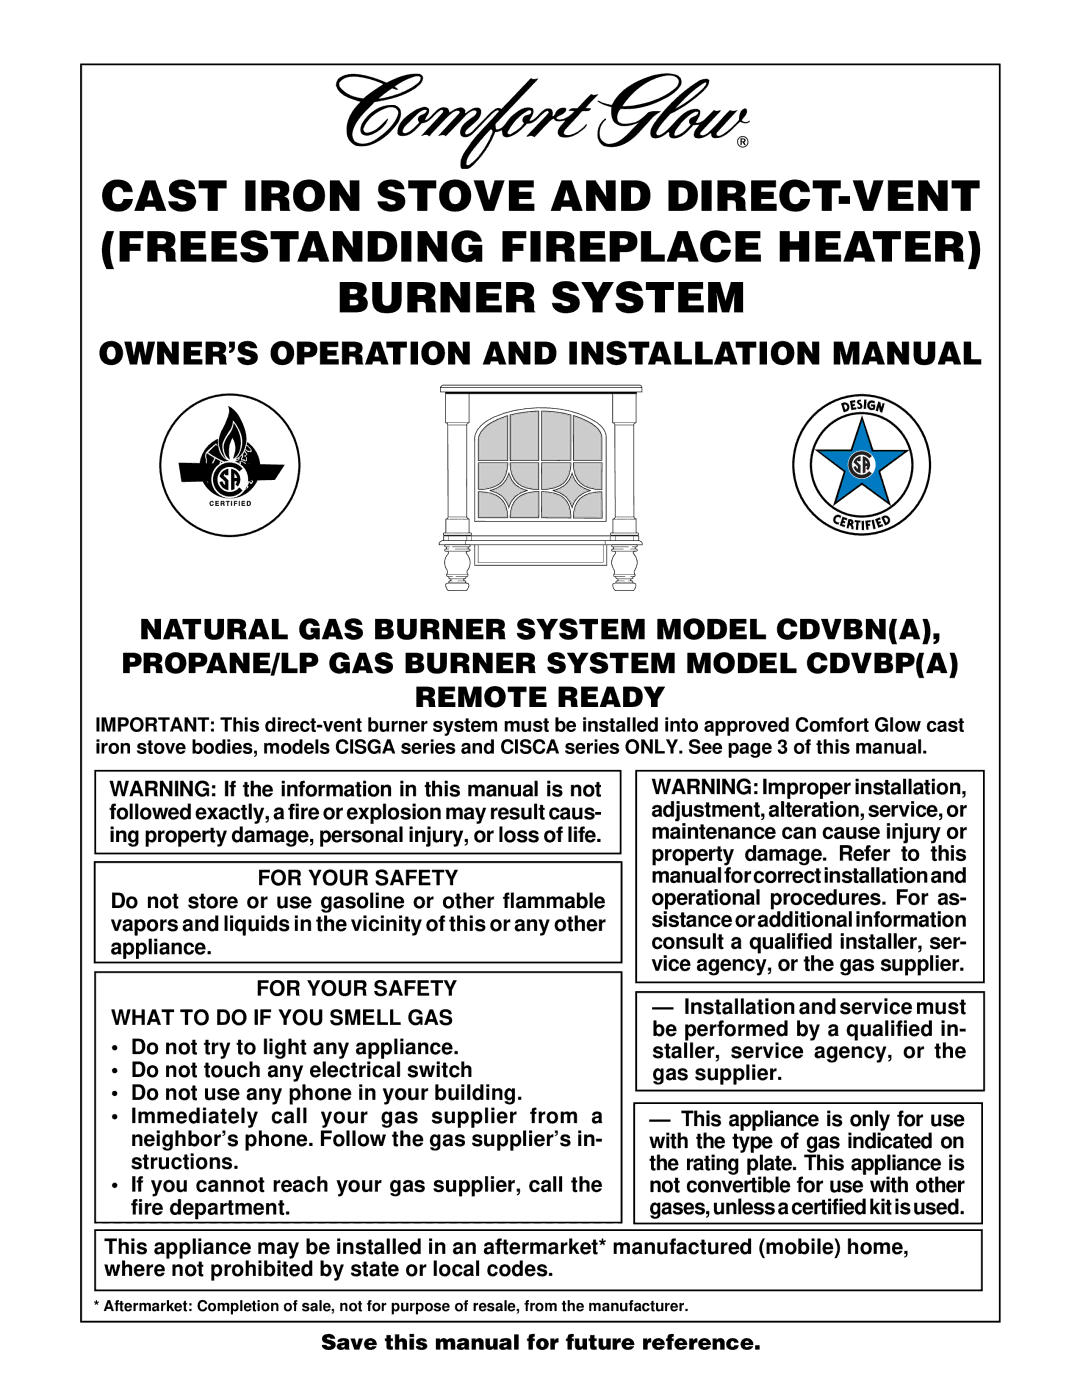 Desa CDVBN(A), CDVBP(A) installation manual For Your Safety What to do if YOU Smell GAS 